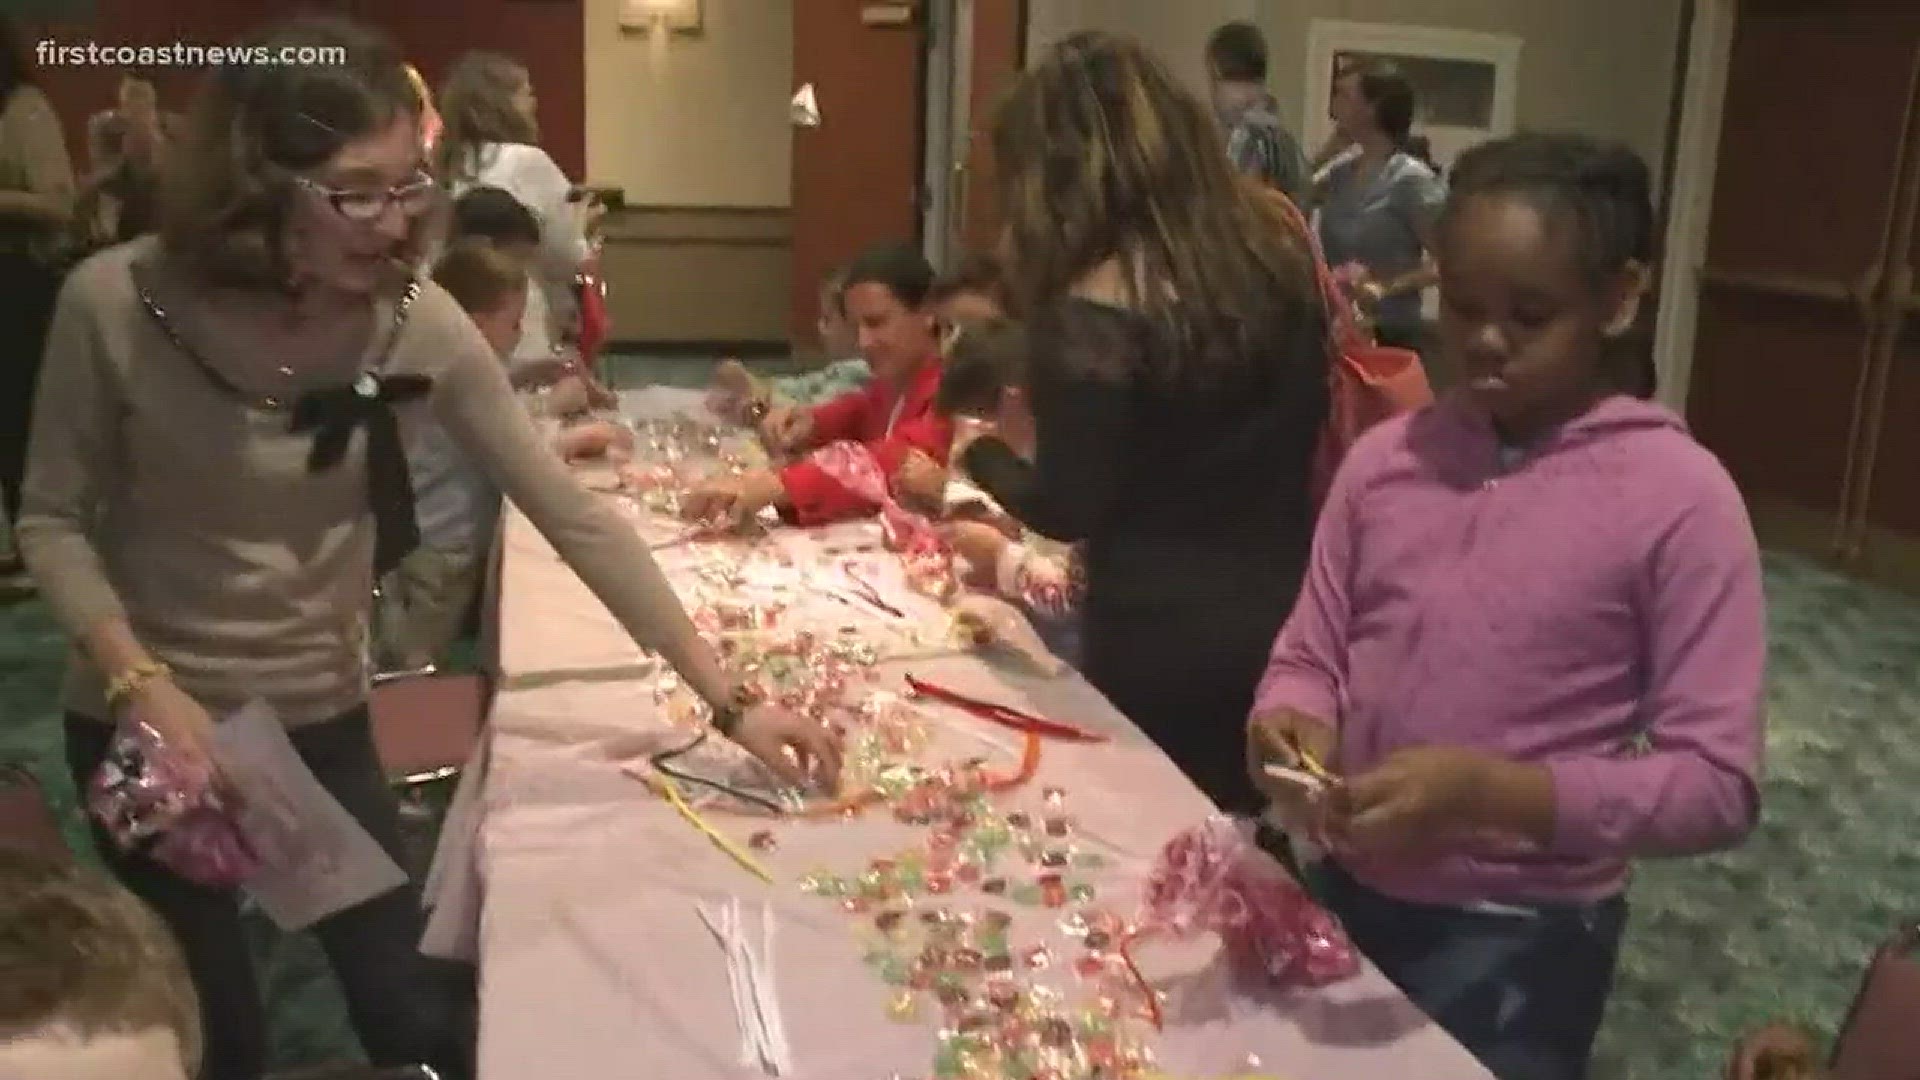 Numerous children with cancer diagnoses are partying Sunday at the Times-Union Center as a day to get away from their diagnoses.